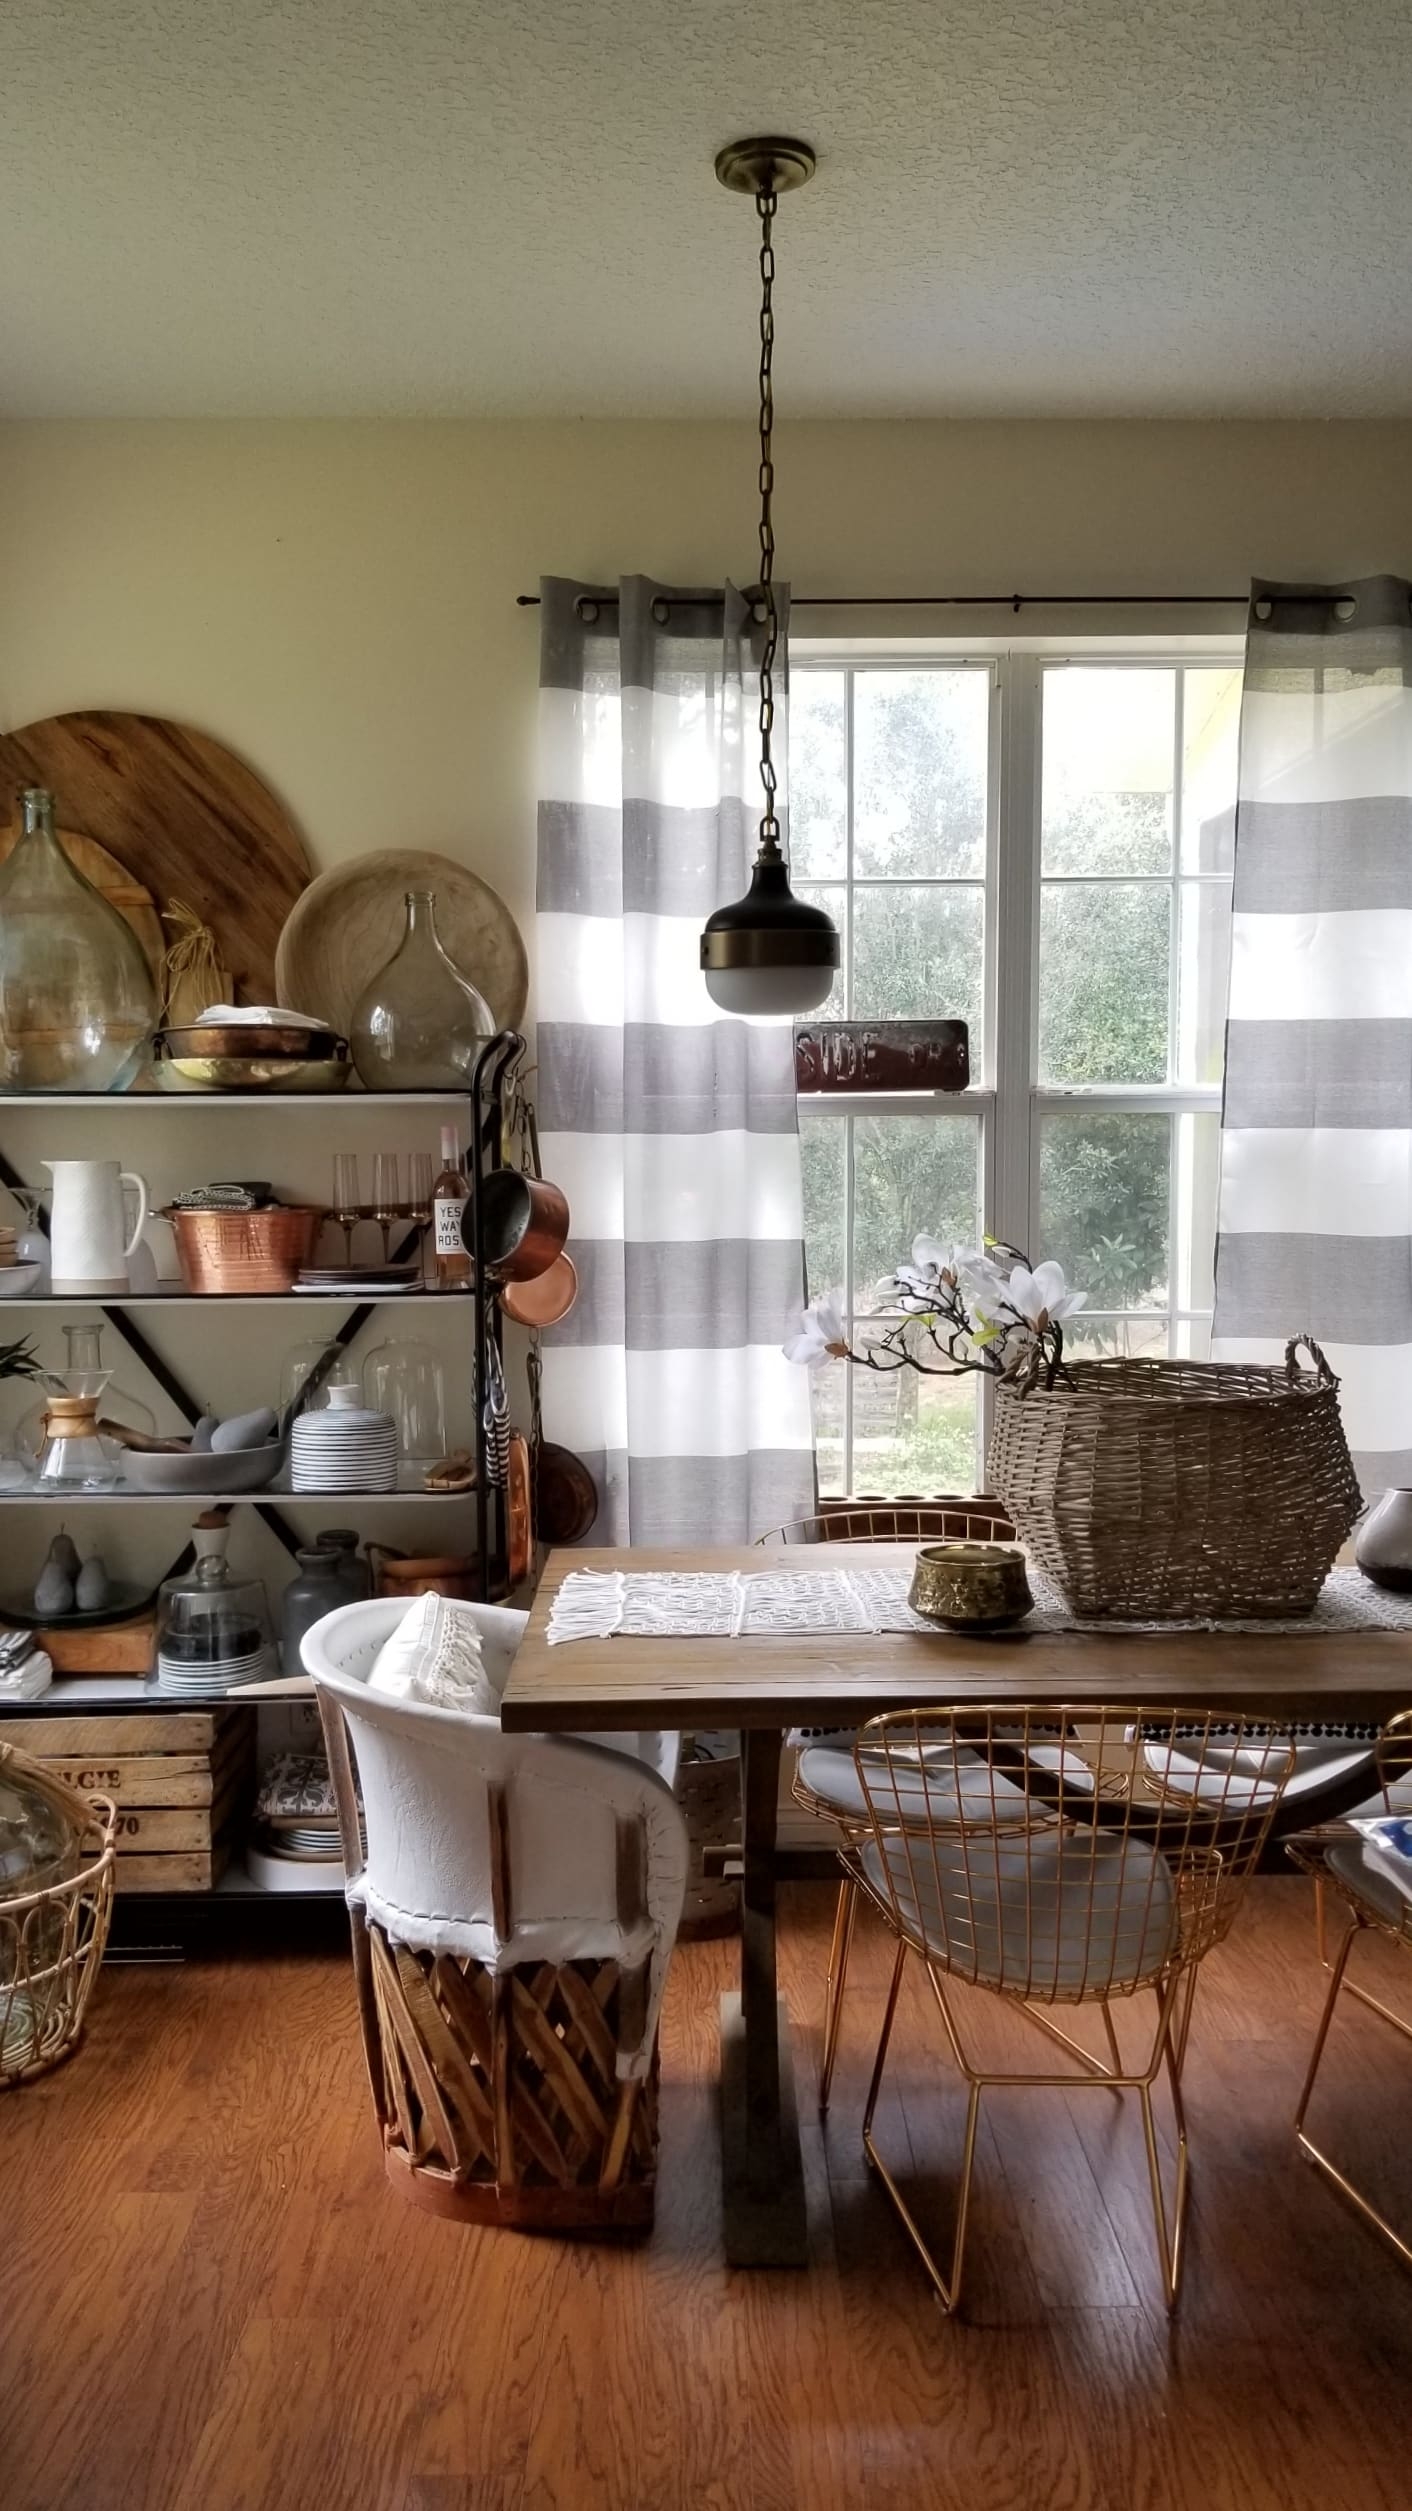  Rustic Modern European French Farmhouse Copper White Black Decor Design Home Interior Inspiration Kitchen Dining Room Farmhouse Table Open Shelving Baskets Pottery Rolling Cart At Home